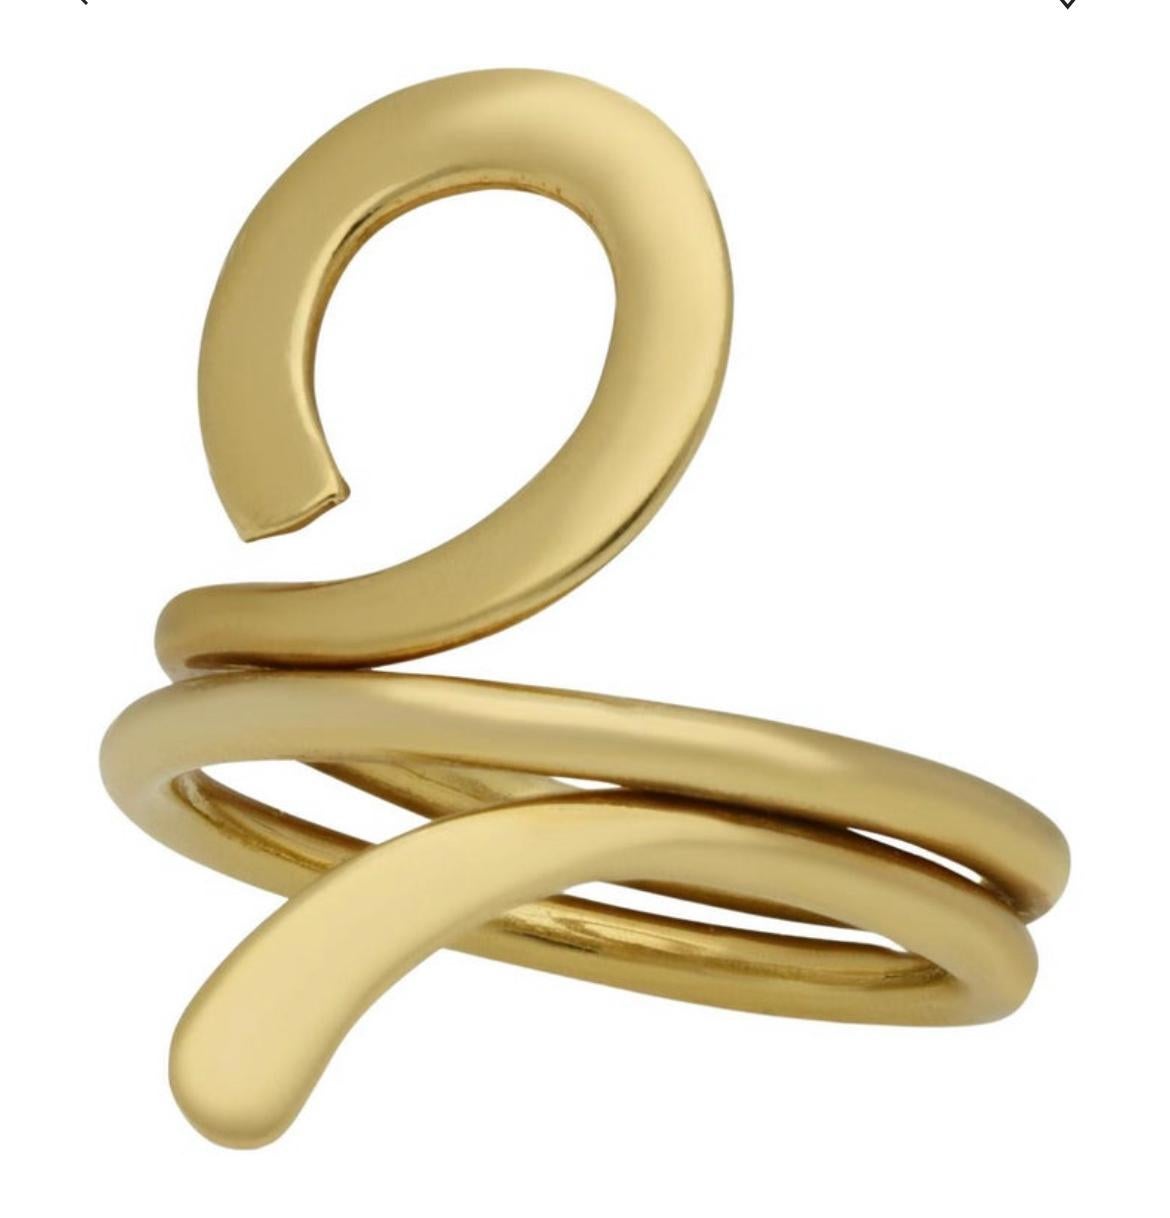 An Ancient Egyptian symbol, the Ankh is said to represent everything from life to harmony to the sun and movement of time. This stylized Ankh ring was made by Jean Dinh Van for Cartier in the 1970s- a modern and polished take on this centuries old